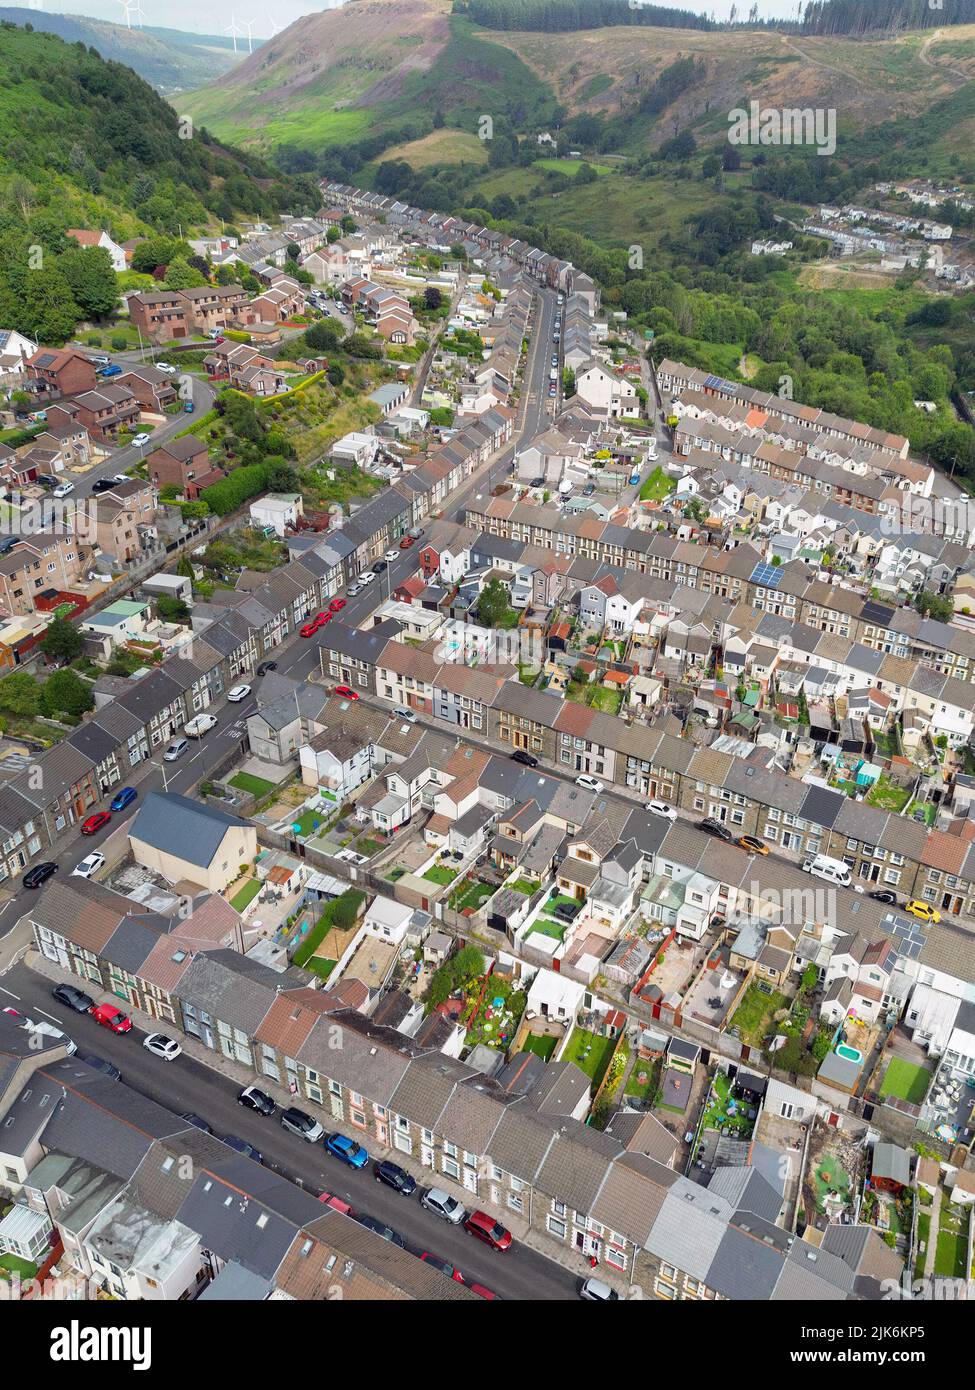 Ferndale, Rhondda Valley, Wales - July 2022: Aerial view of terraced houses in the village of Ferndale in the Rhondda Fach valley in south Wales Stock Photo